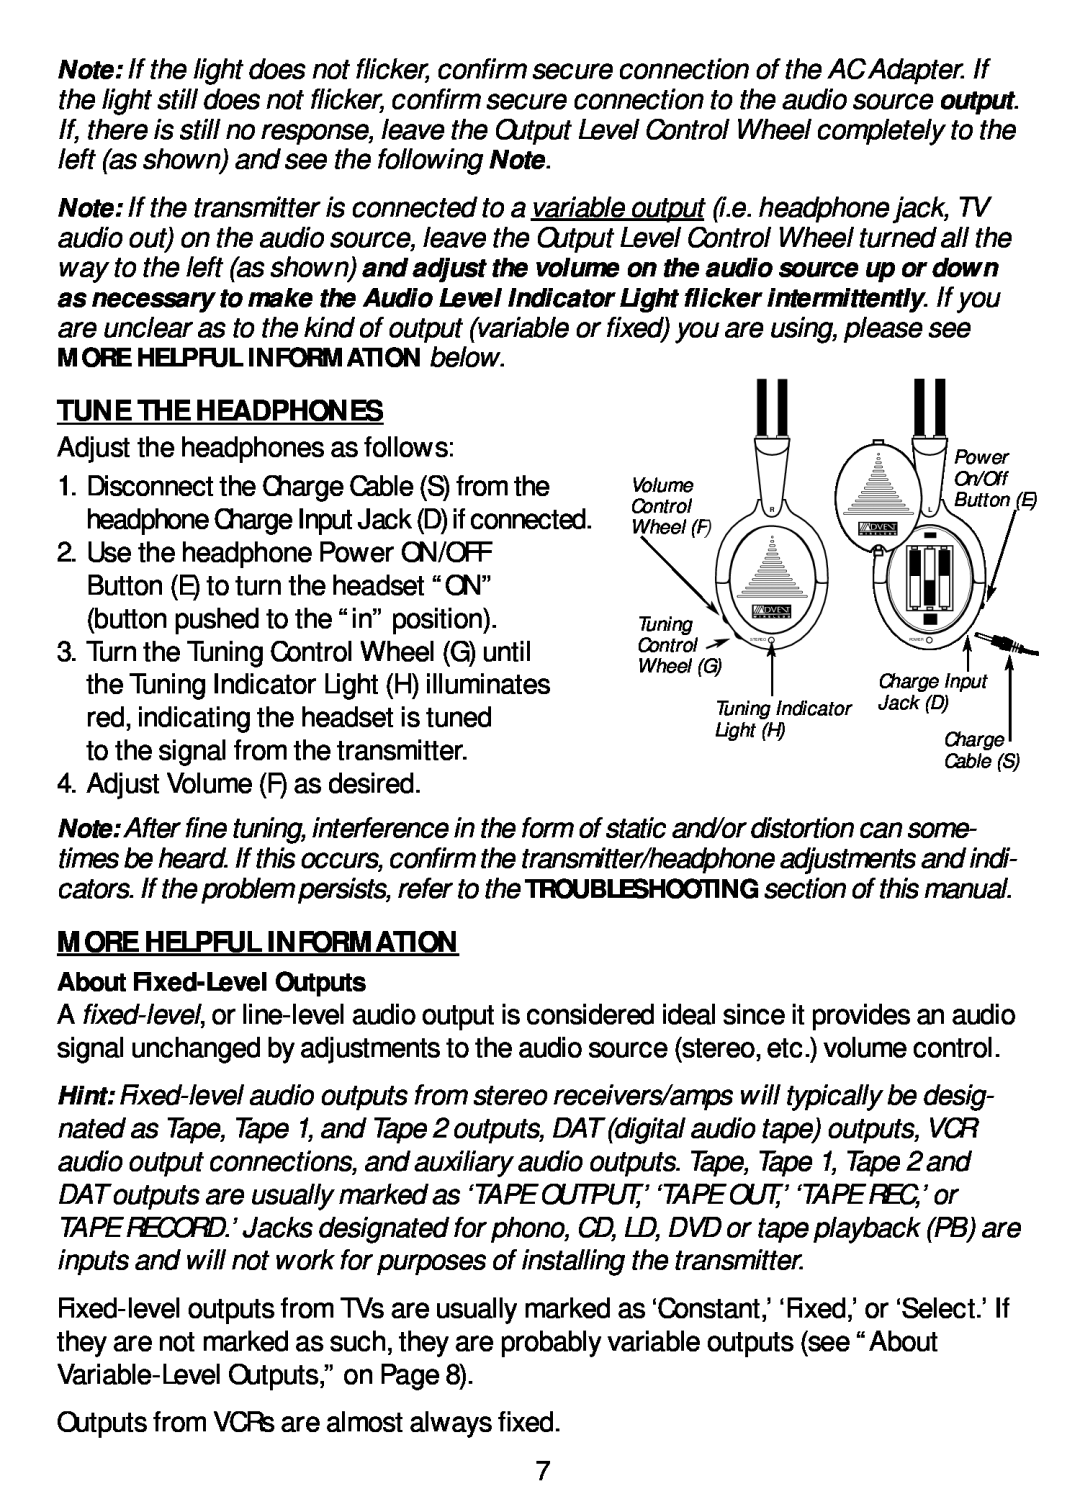 Recoton/Advent AW770 manual Tune The Headphones, More Helpful Information, About Fixed-LevelOutputs 